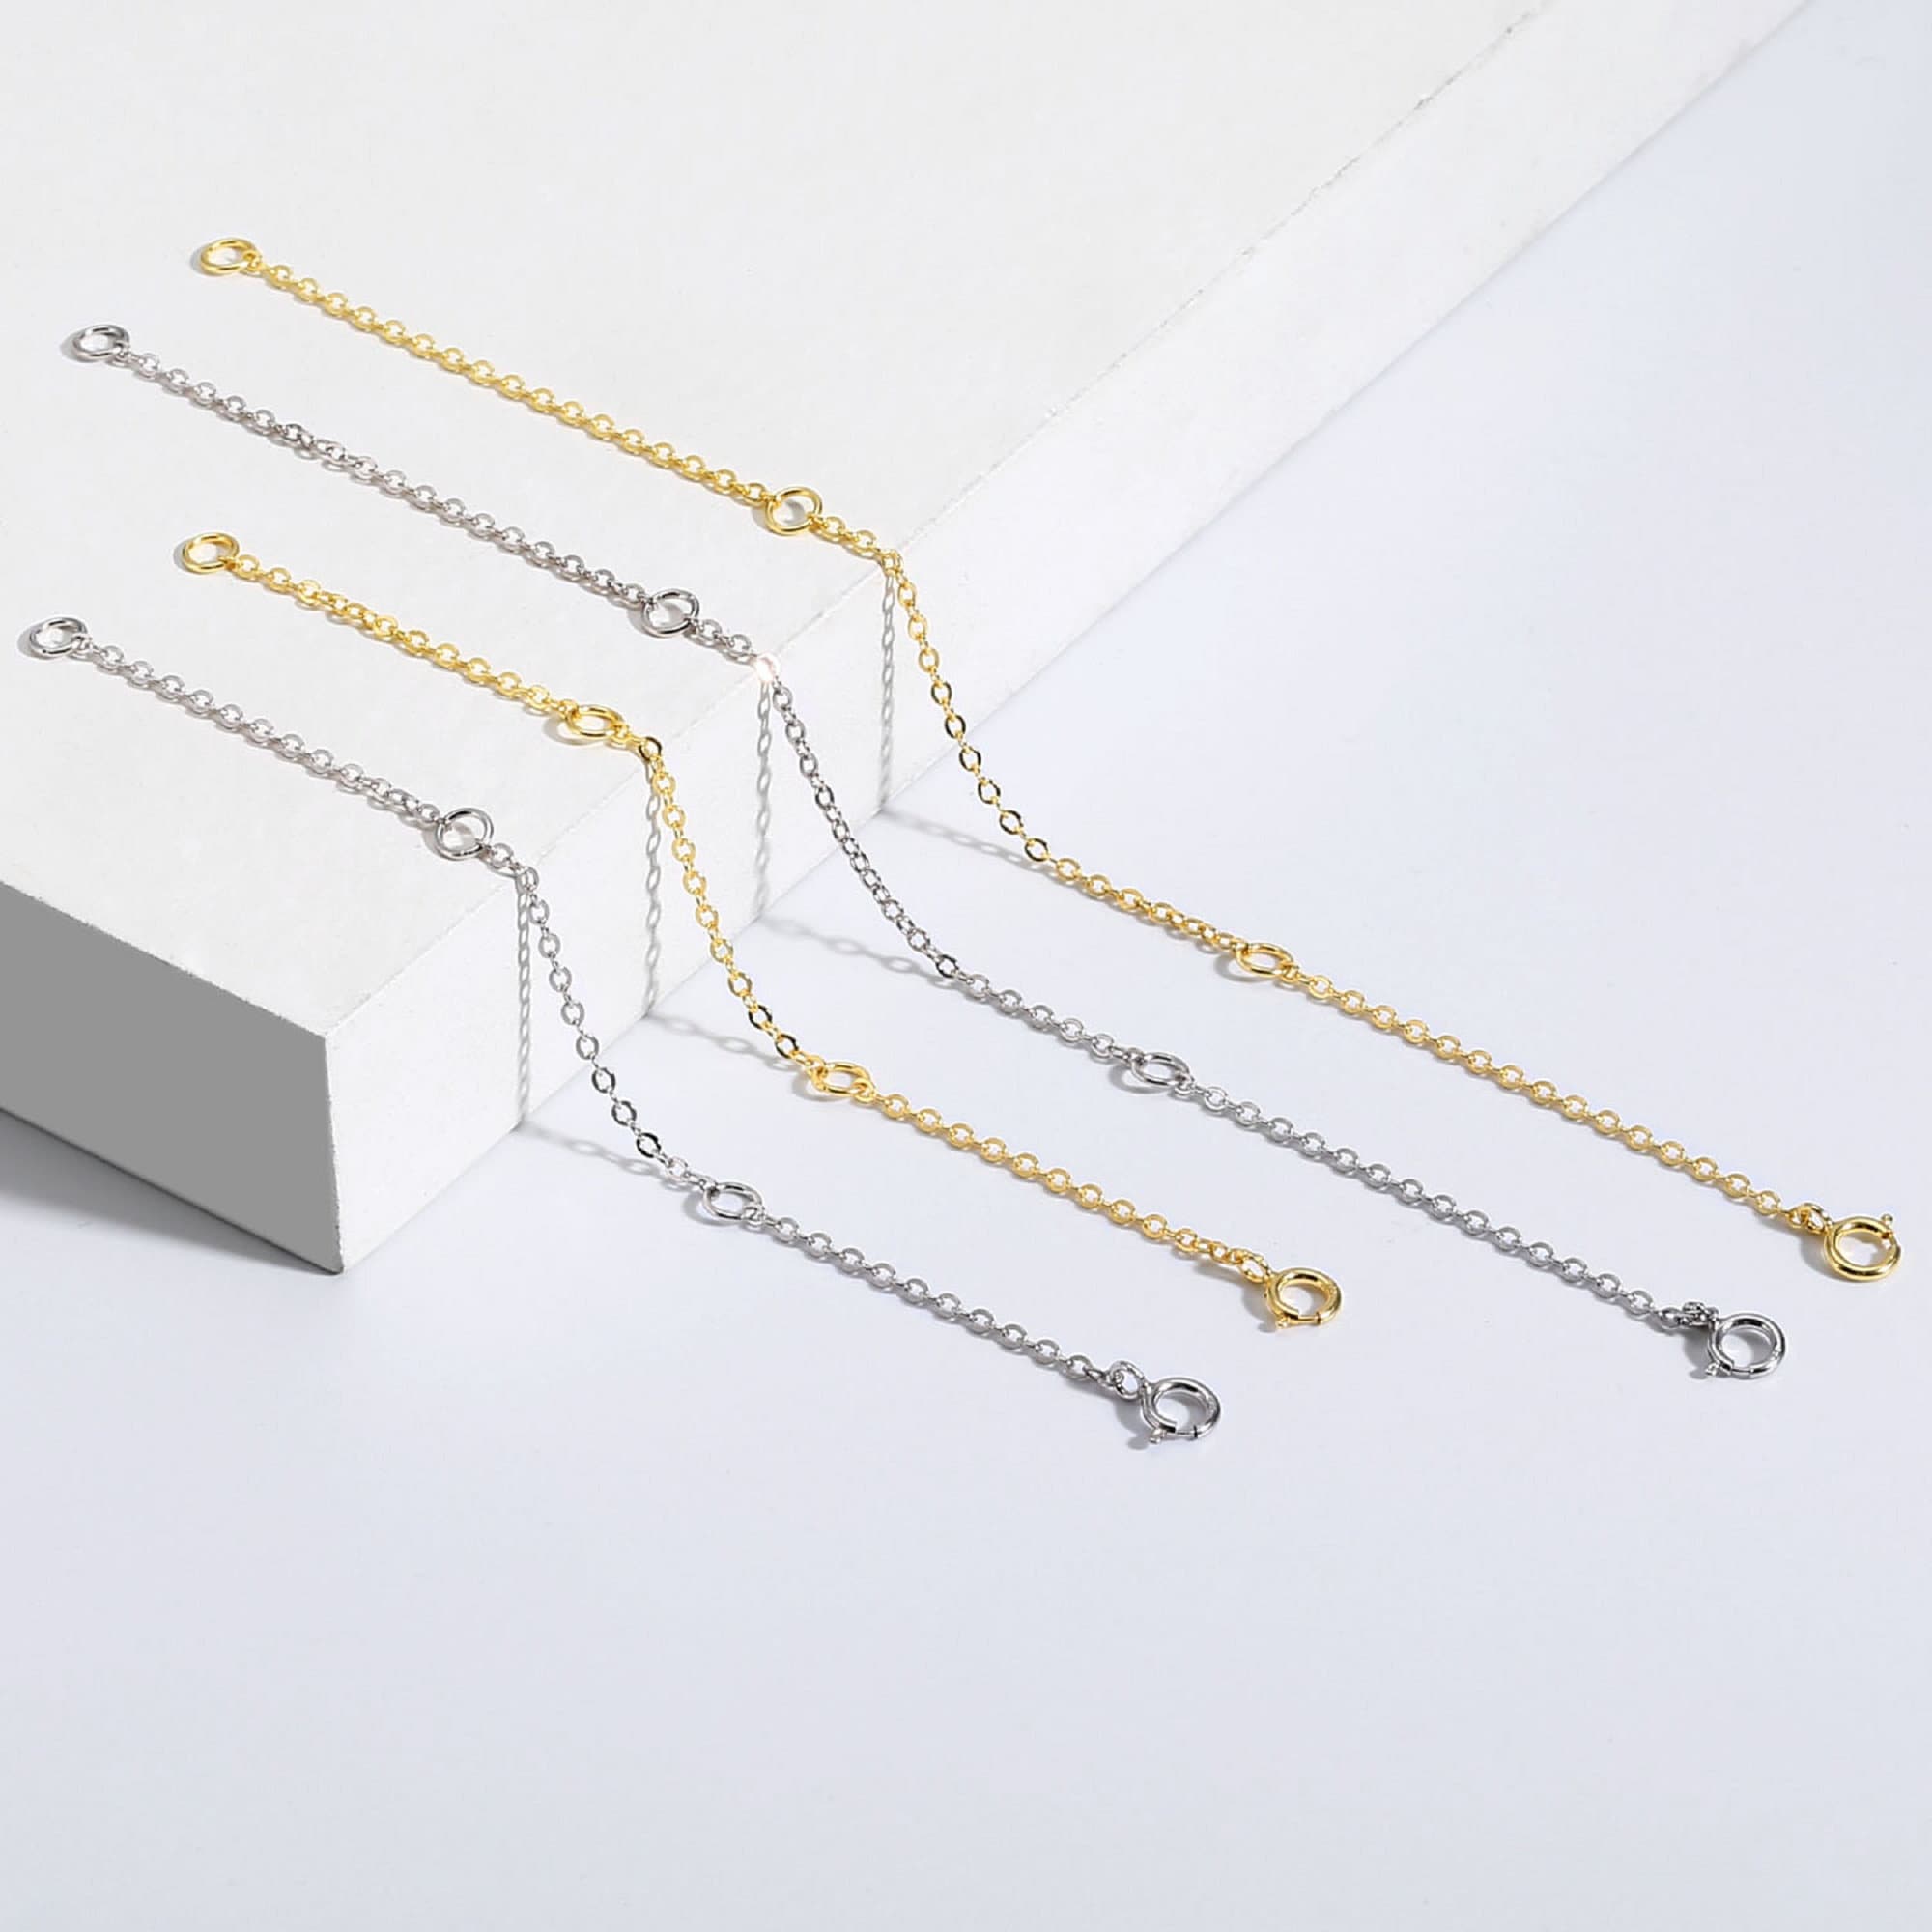  4Pcs 925 Sterling Silver Necklace Extender, Gold Chain